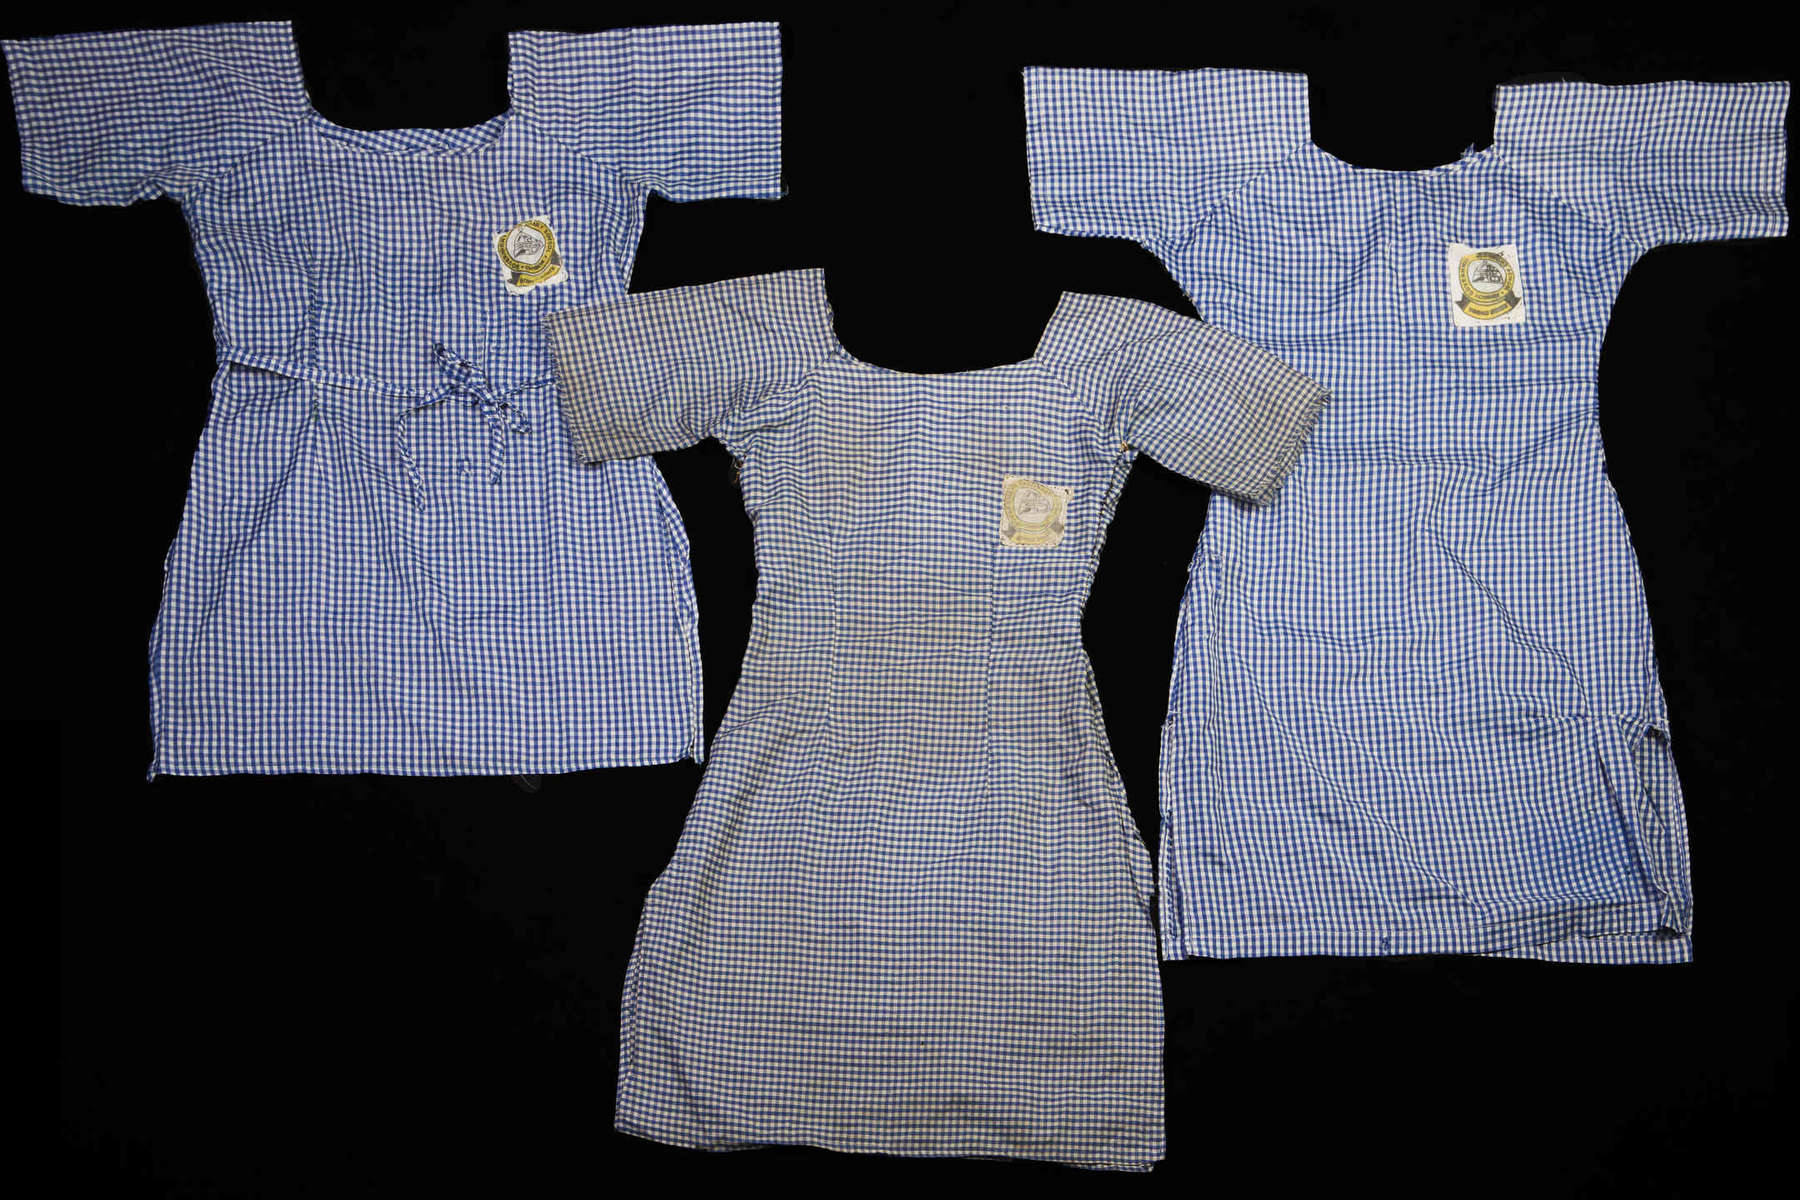 Chibok girl's school uniforms. One was clearly made in a hurry, in messy stitching and different color threads. Another one was well made but utilitarian – probably stitched by the girl’s mother. Another dress was especially dirty and threadbare.  Maybe the girl was going to wash it tomorrow. Maybe she couldn’t afford soap and was waiting until she could. It’d been stitched again and again at the sides – torn and repaired, probably the only uniform she had. 